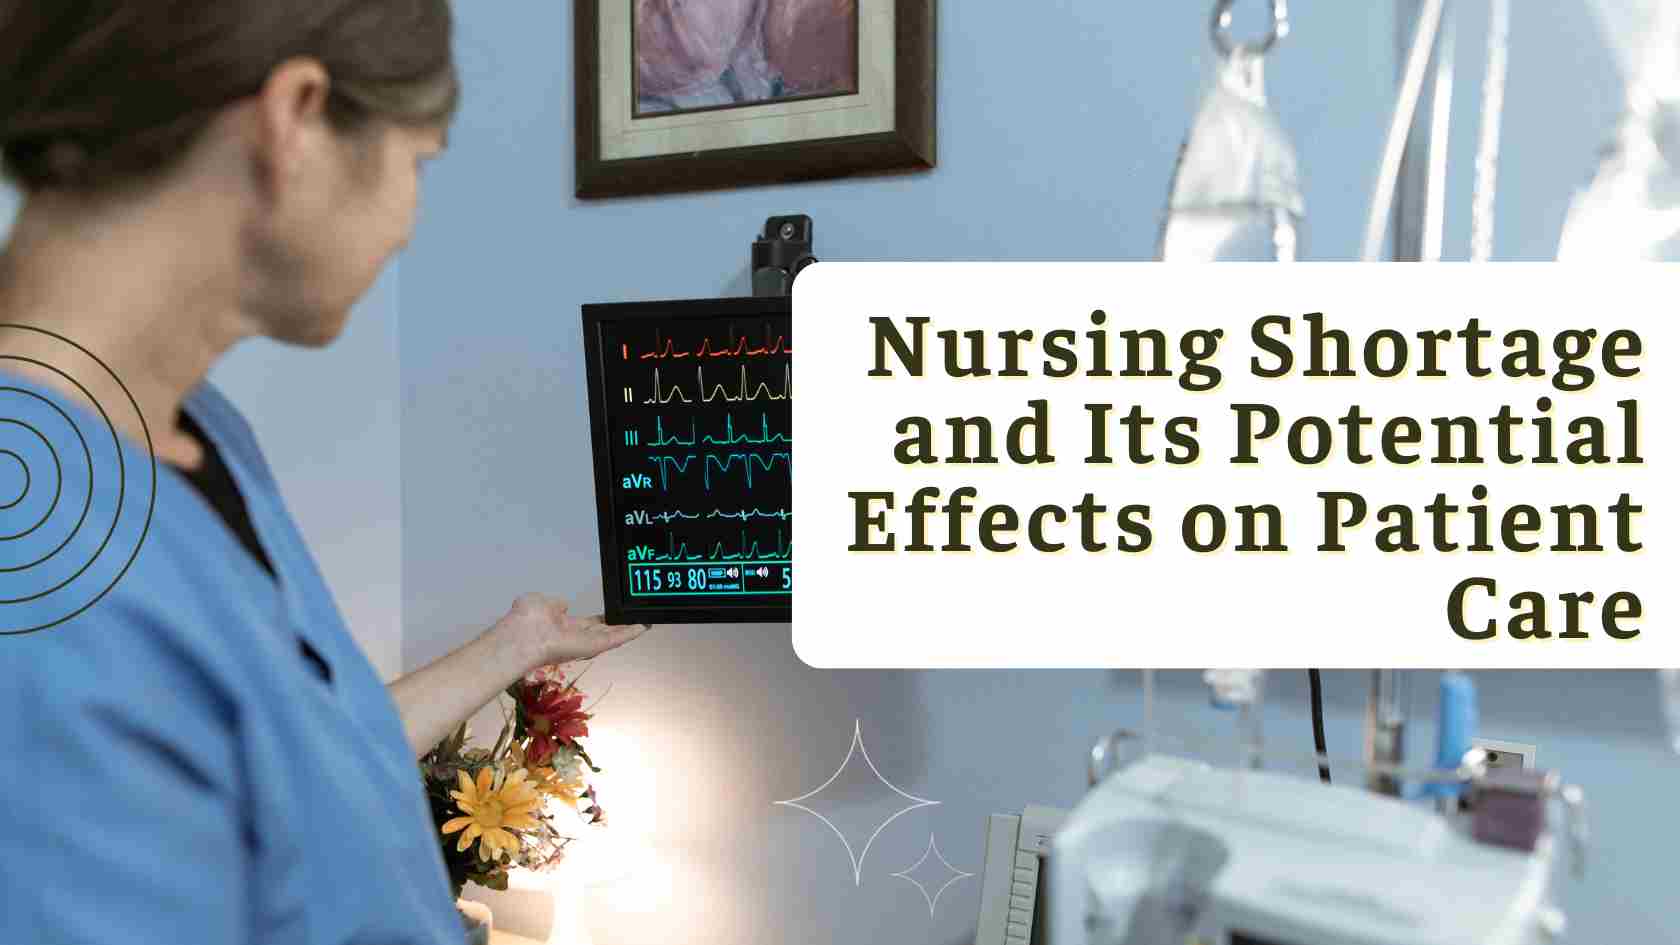 The Nursing Shortage and Its Potential Effects on Patient Care